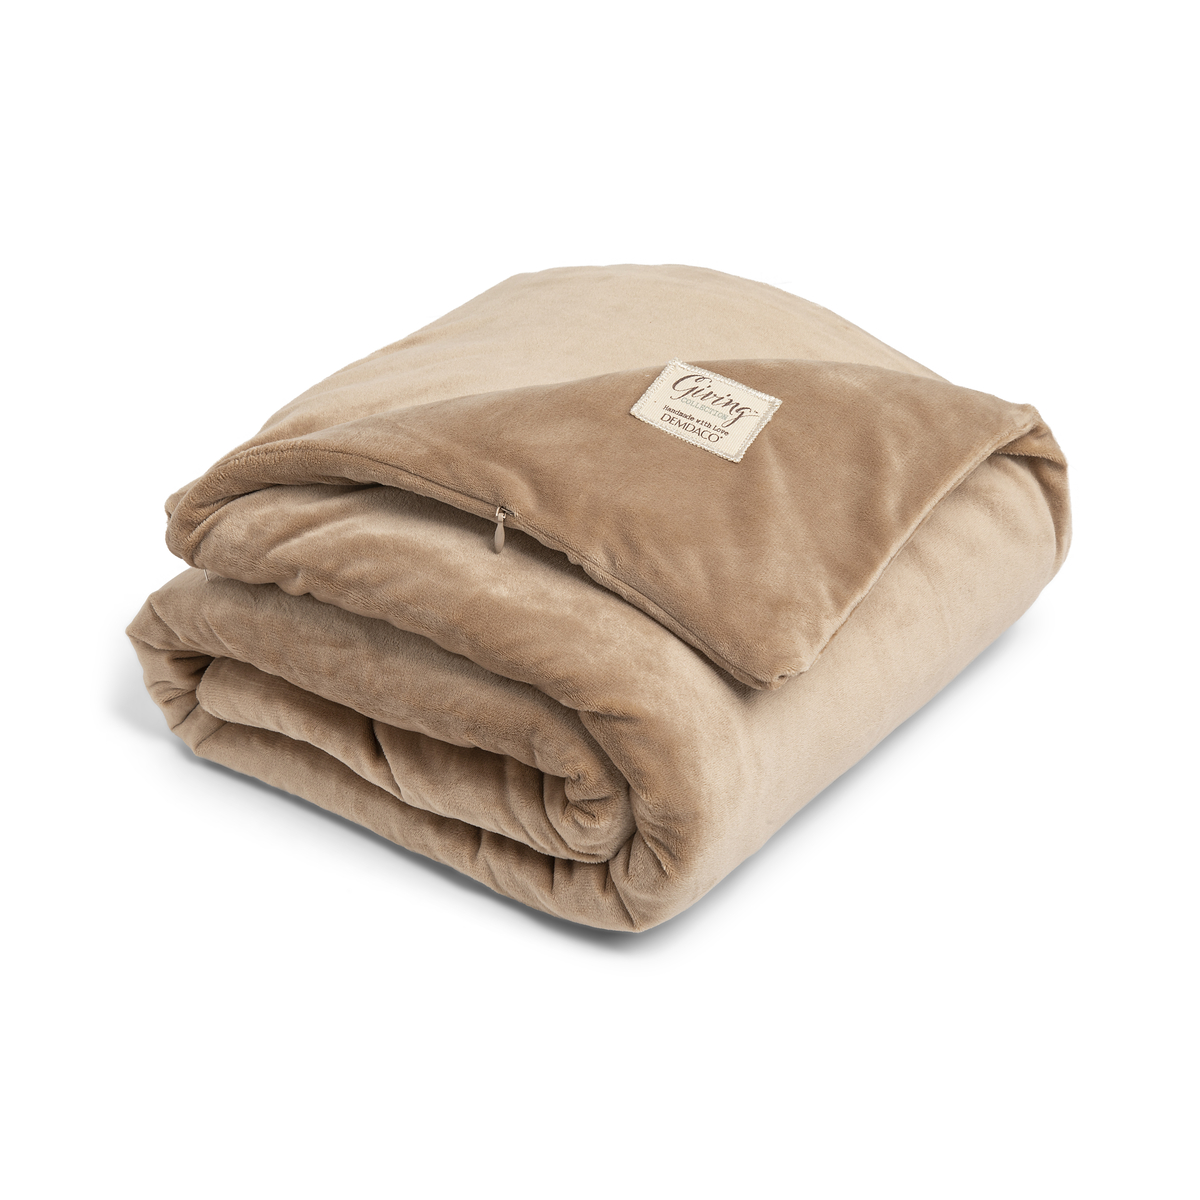 Weighted Throw Blanket - Camel